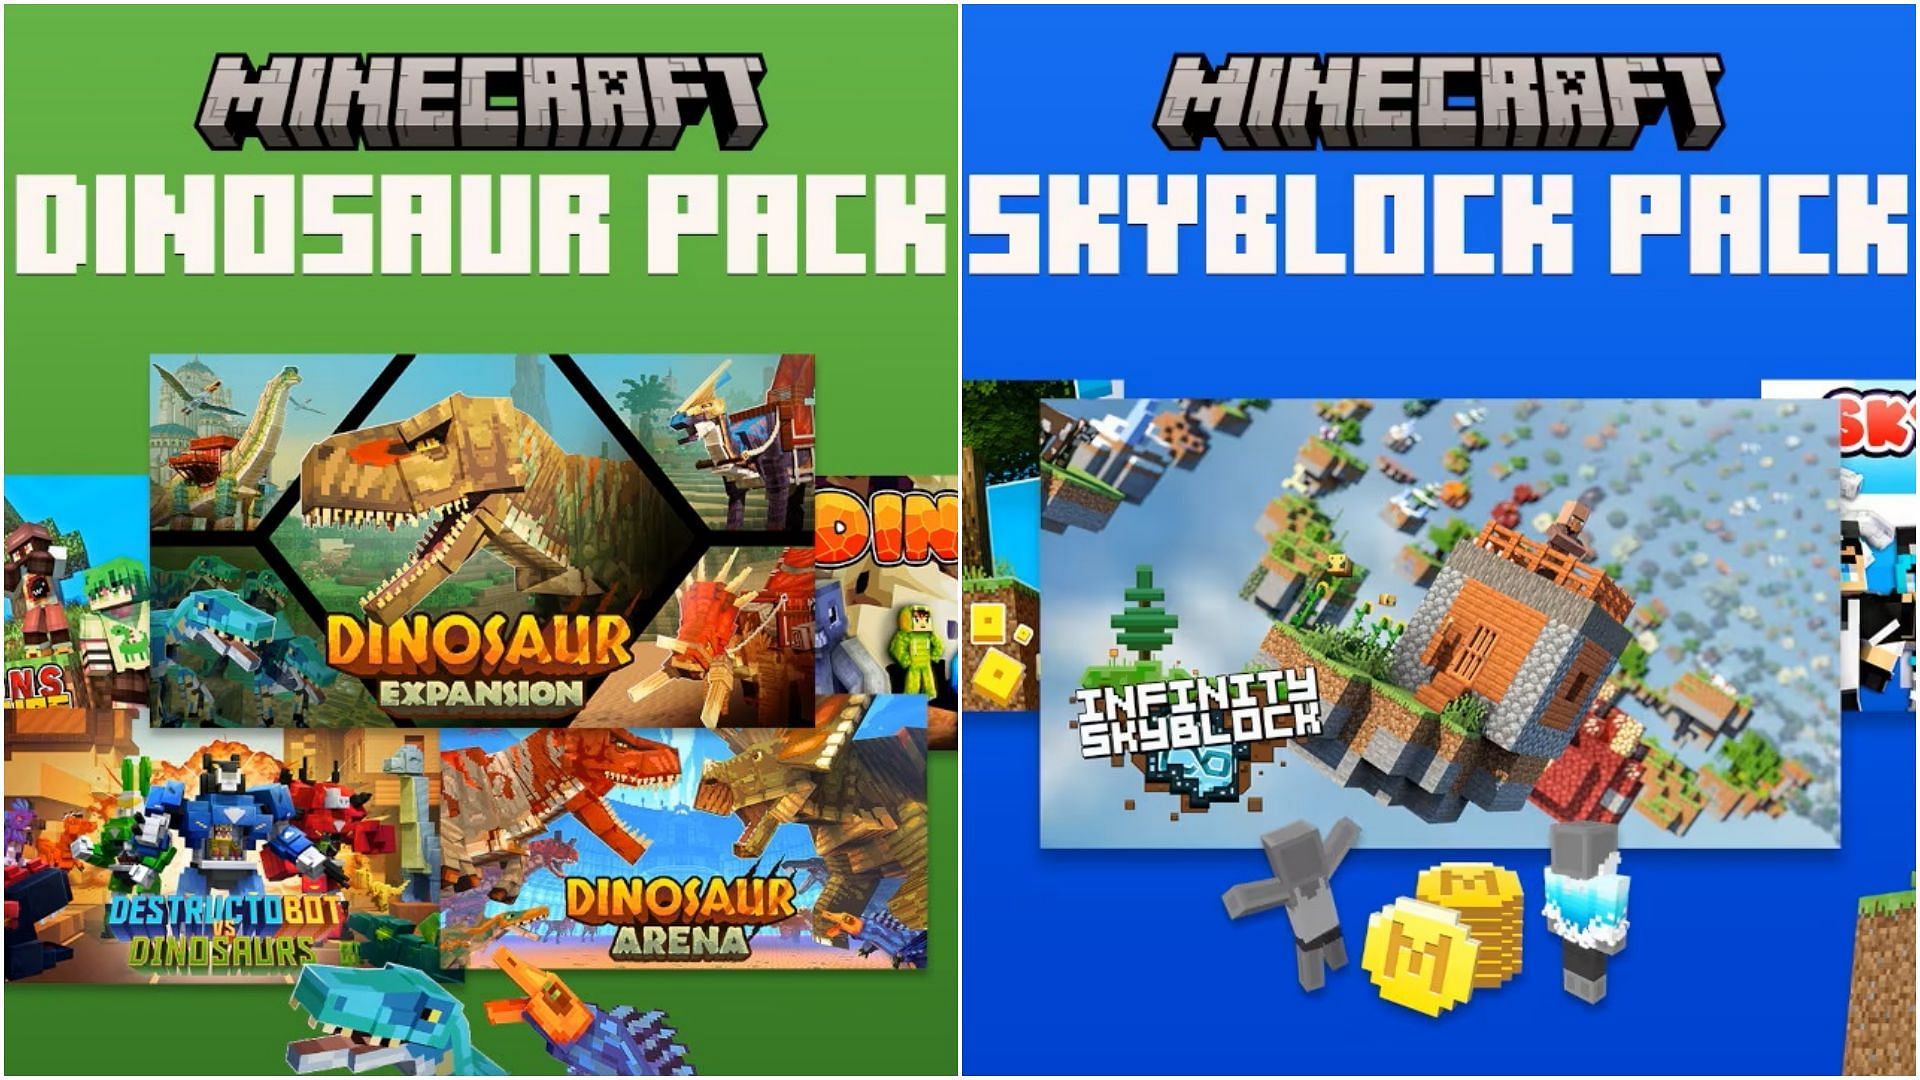 Minecraft Marketplace is bringing loads of new content for players to explore (Image via Sportskeeda)